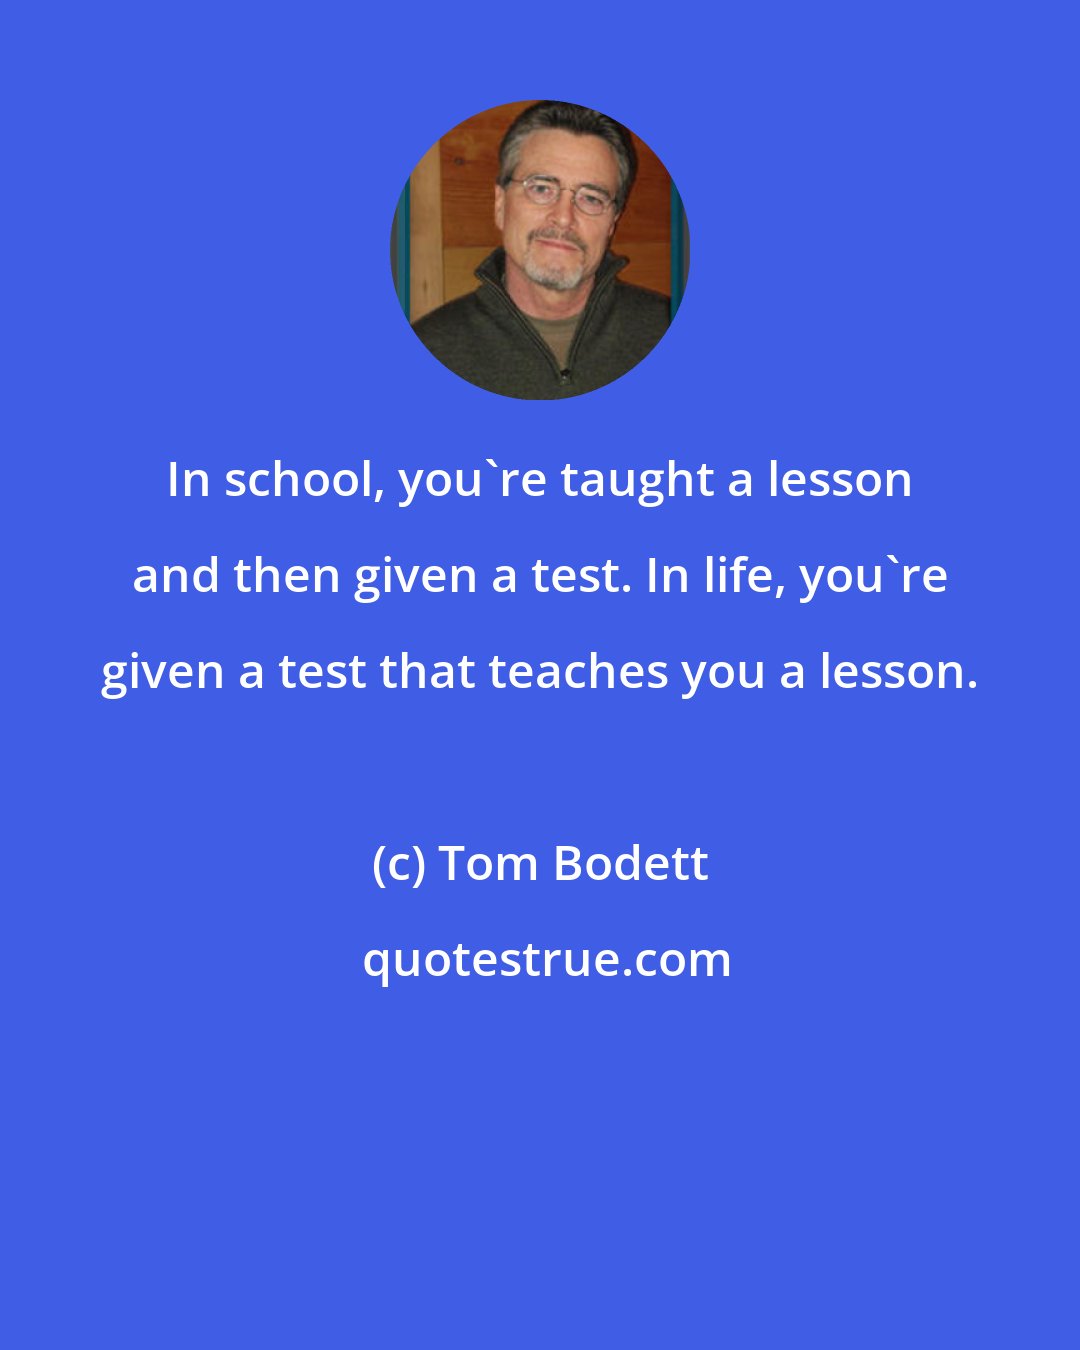 Tom Bodett: In school, you're taught a lesson and then given a test. In life, you're given a test that teaches you a lesson.